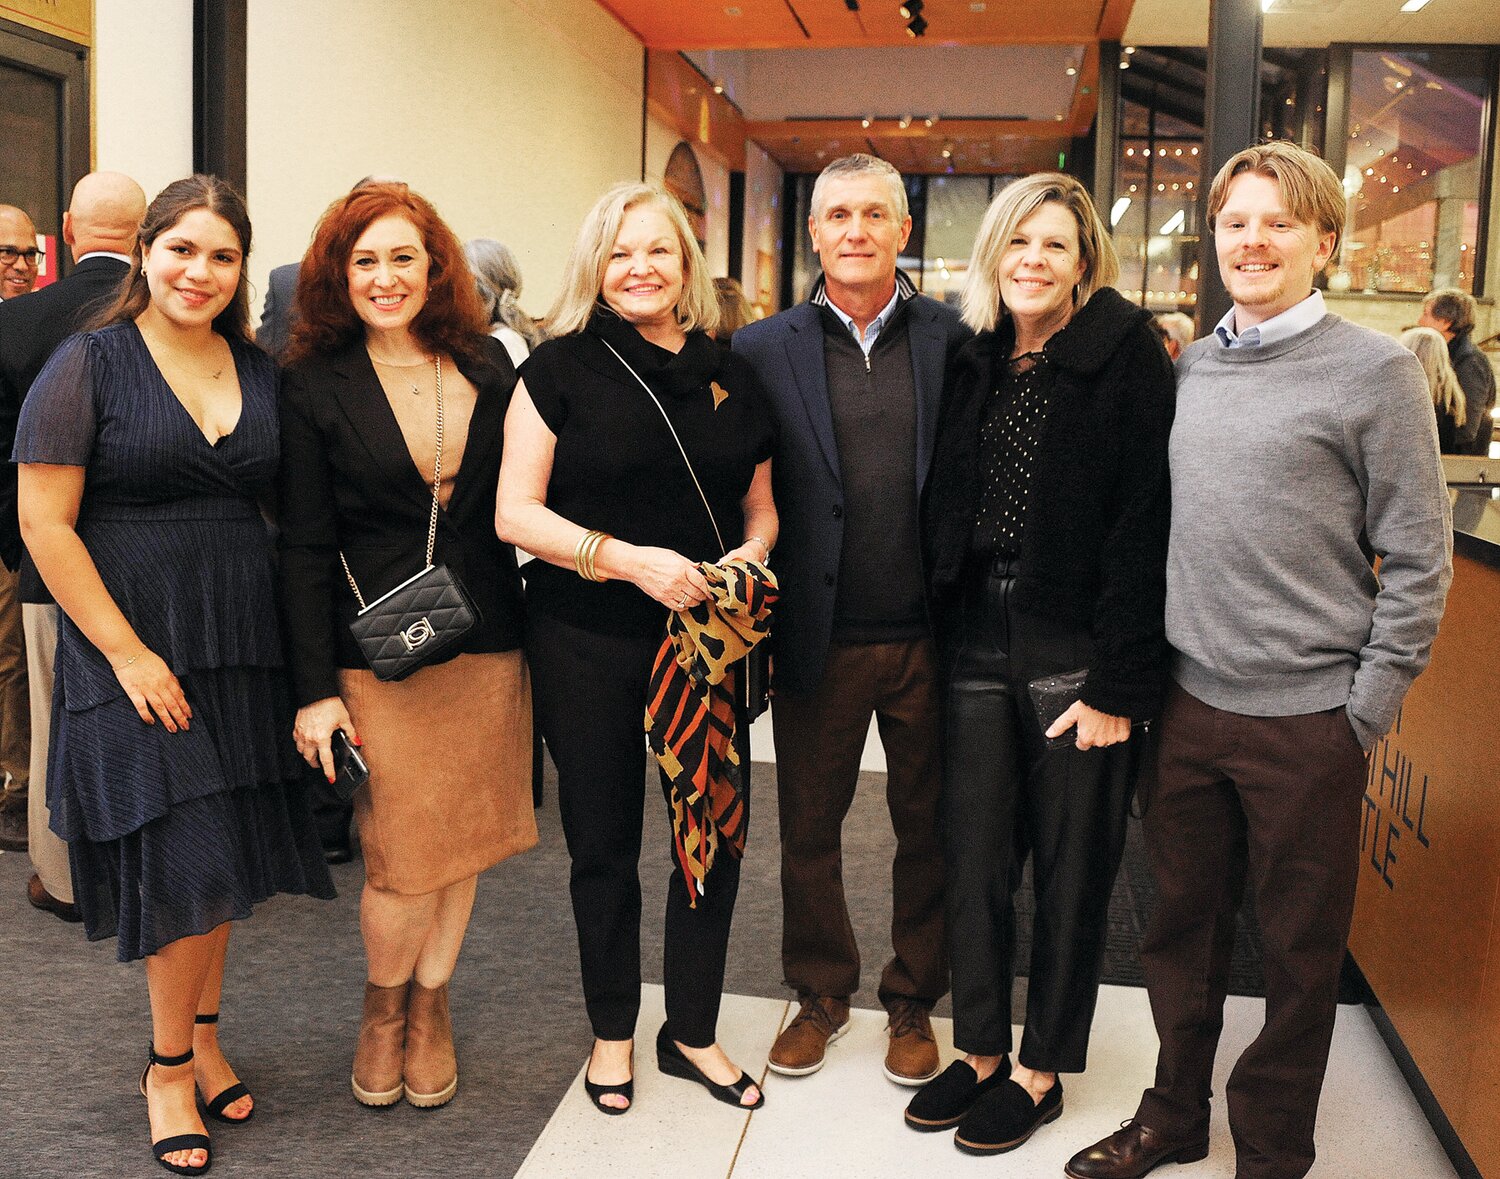 Sarah Claros, Kym Smith, Lin Hadgdon, who chaired the “Cocktails at the Castle” board, Scott Olsen, Nancy Olsen and Jeff Olsen.